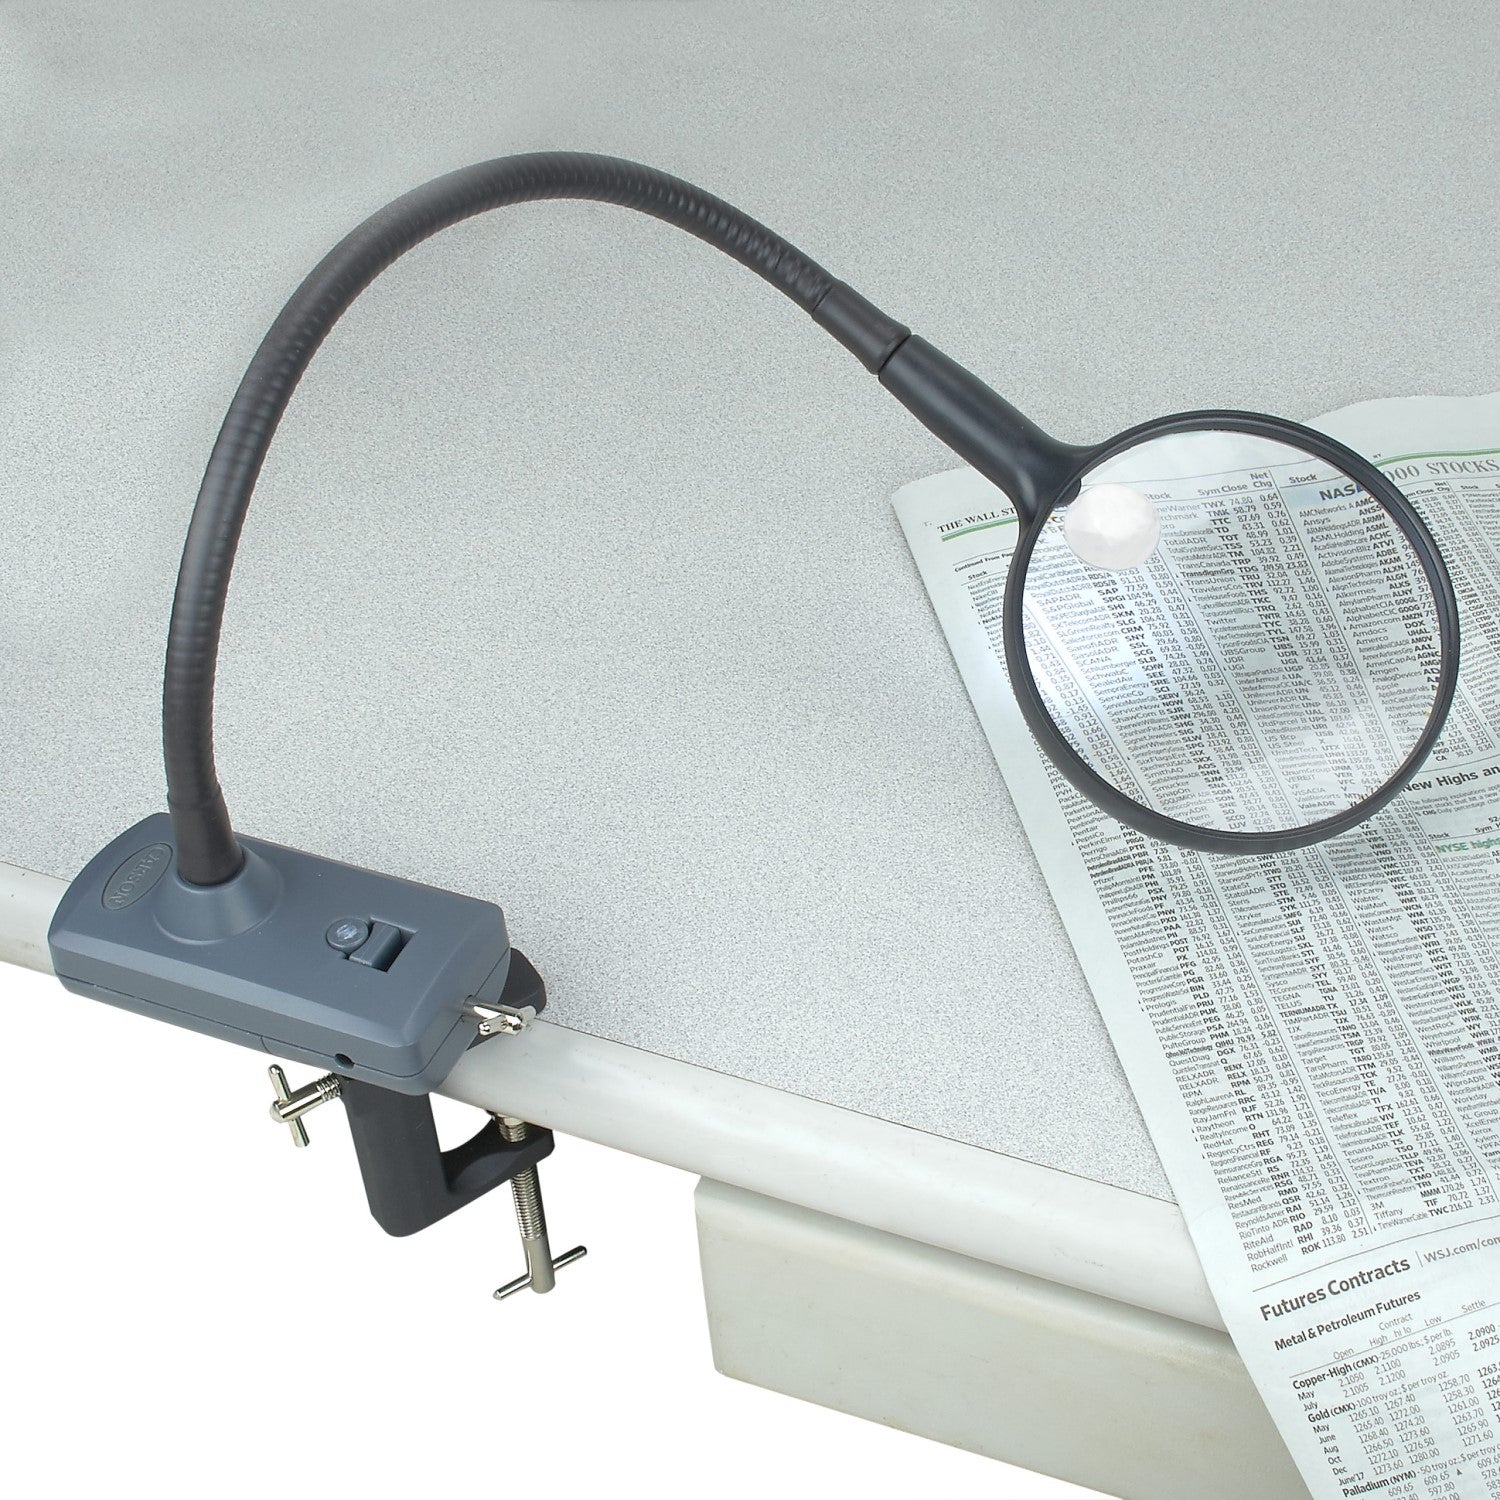 Image of  Magniflex magnifier in use, clamped to a table.